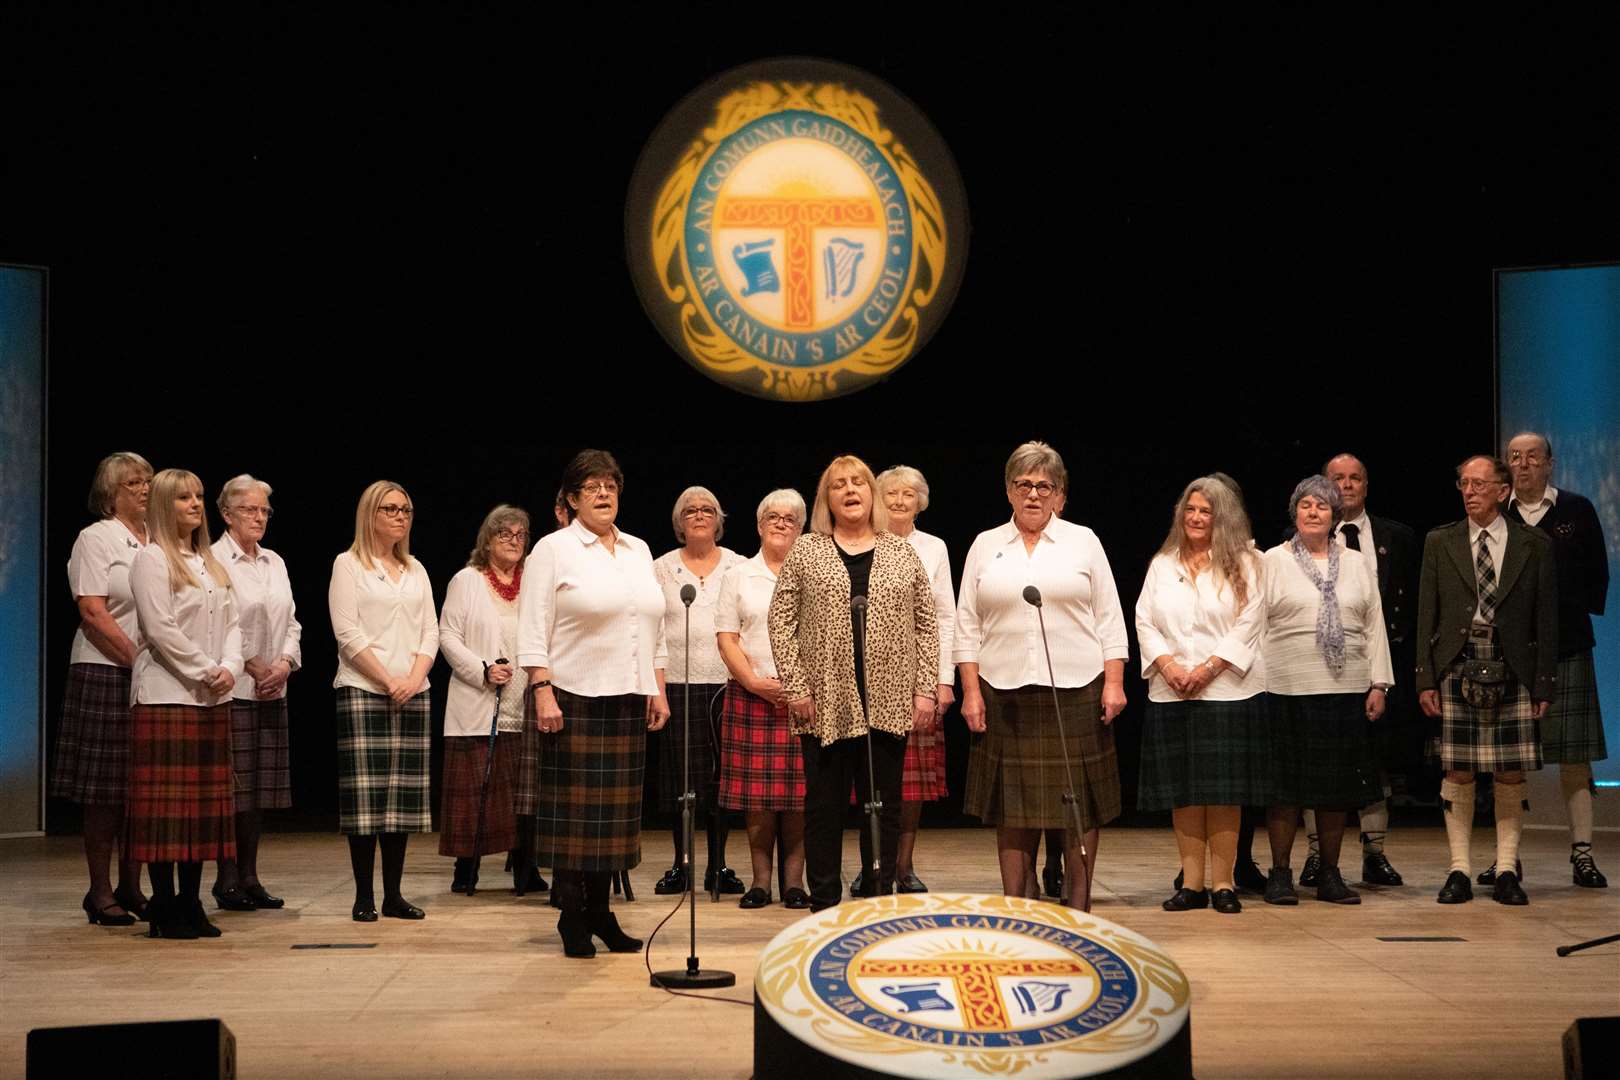 Picture shows Nairn Gaelic Choir performing on stage at Eden Court in Inverness, as choirs from around Scotland graced the Royal National Mòd stage once again on Thursday 14th October to the warmest of welcomes in the first of this year’s choir showcase concerts.